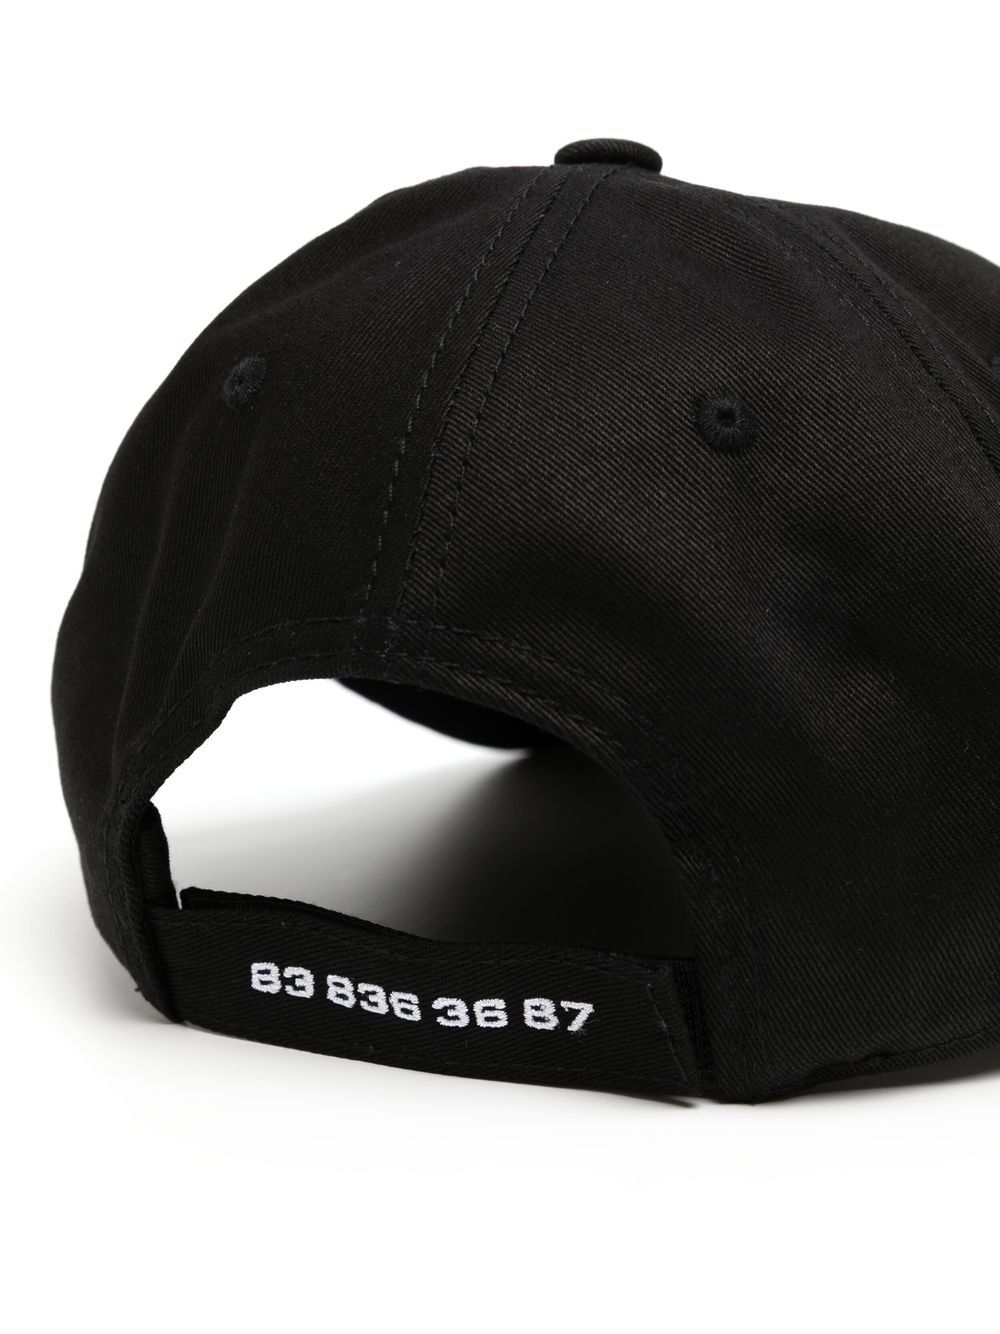 Vtmnts VTMNTS- Hat With Barcode Print